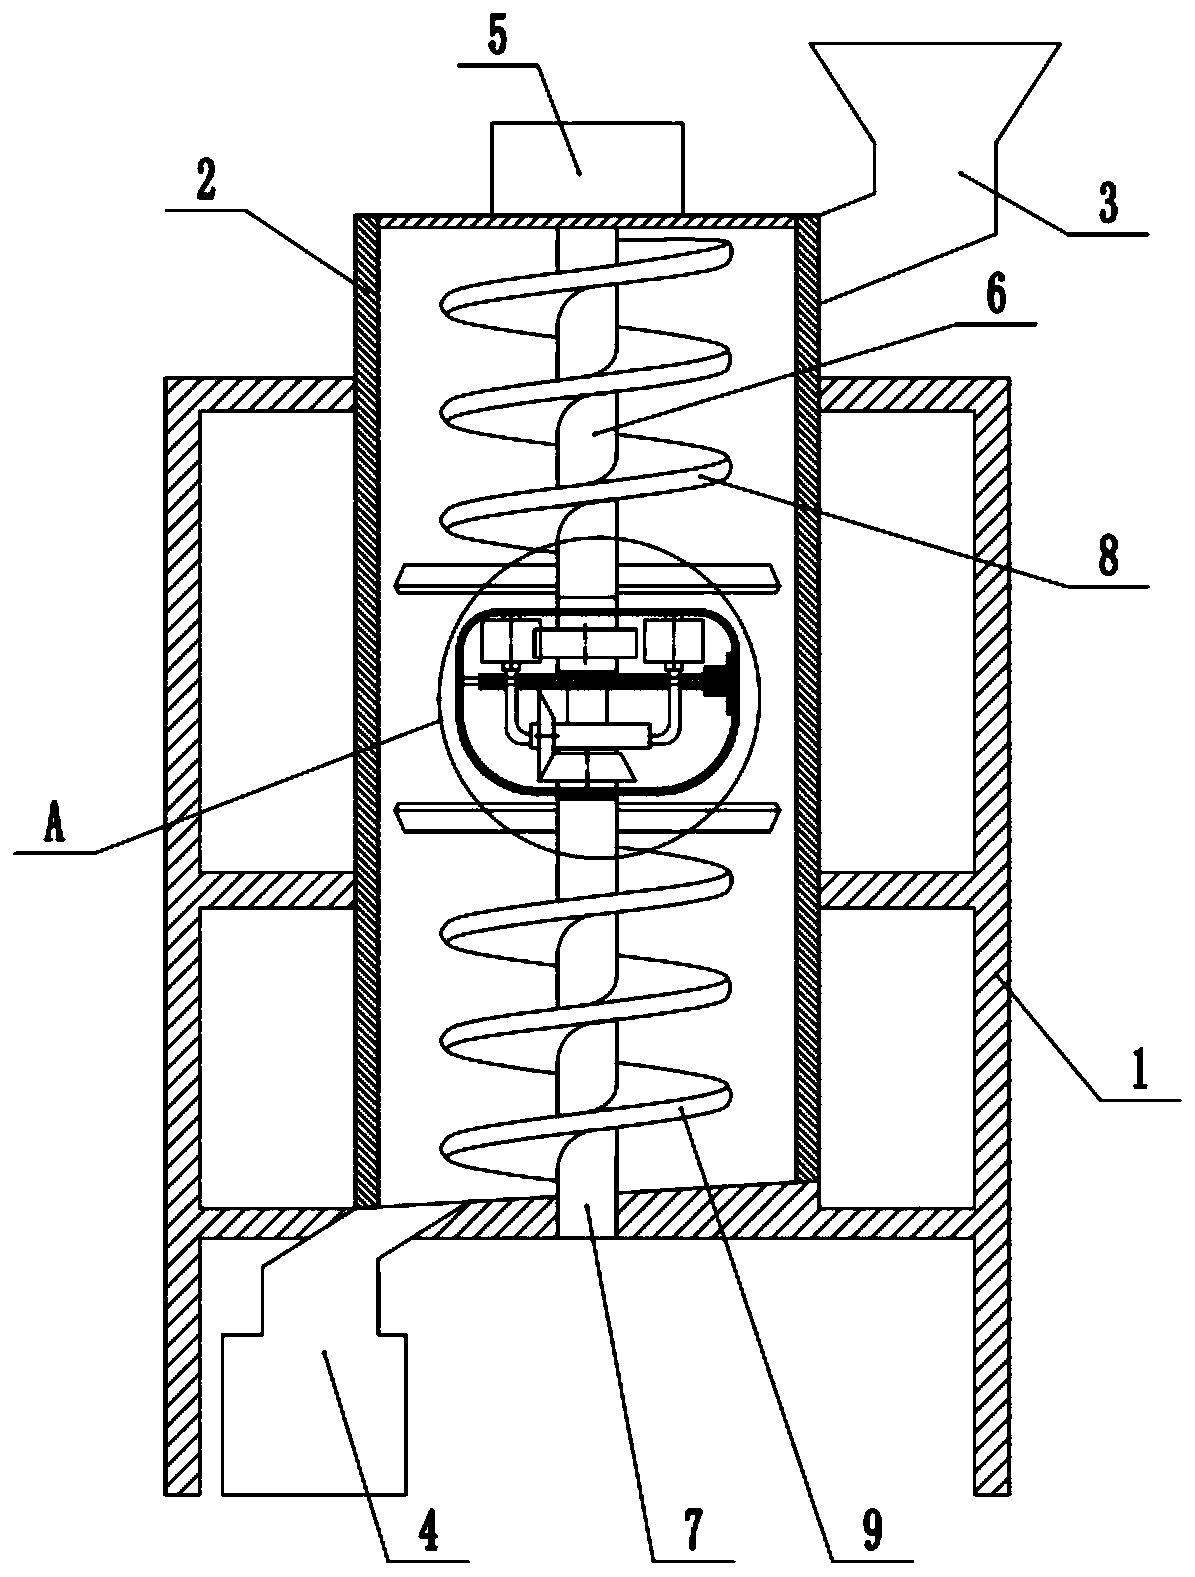 Building material processing device